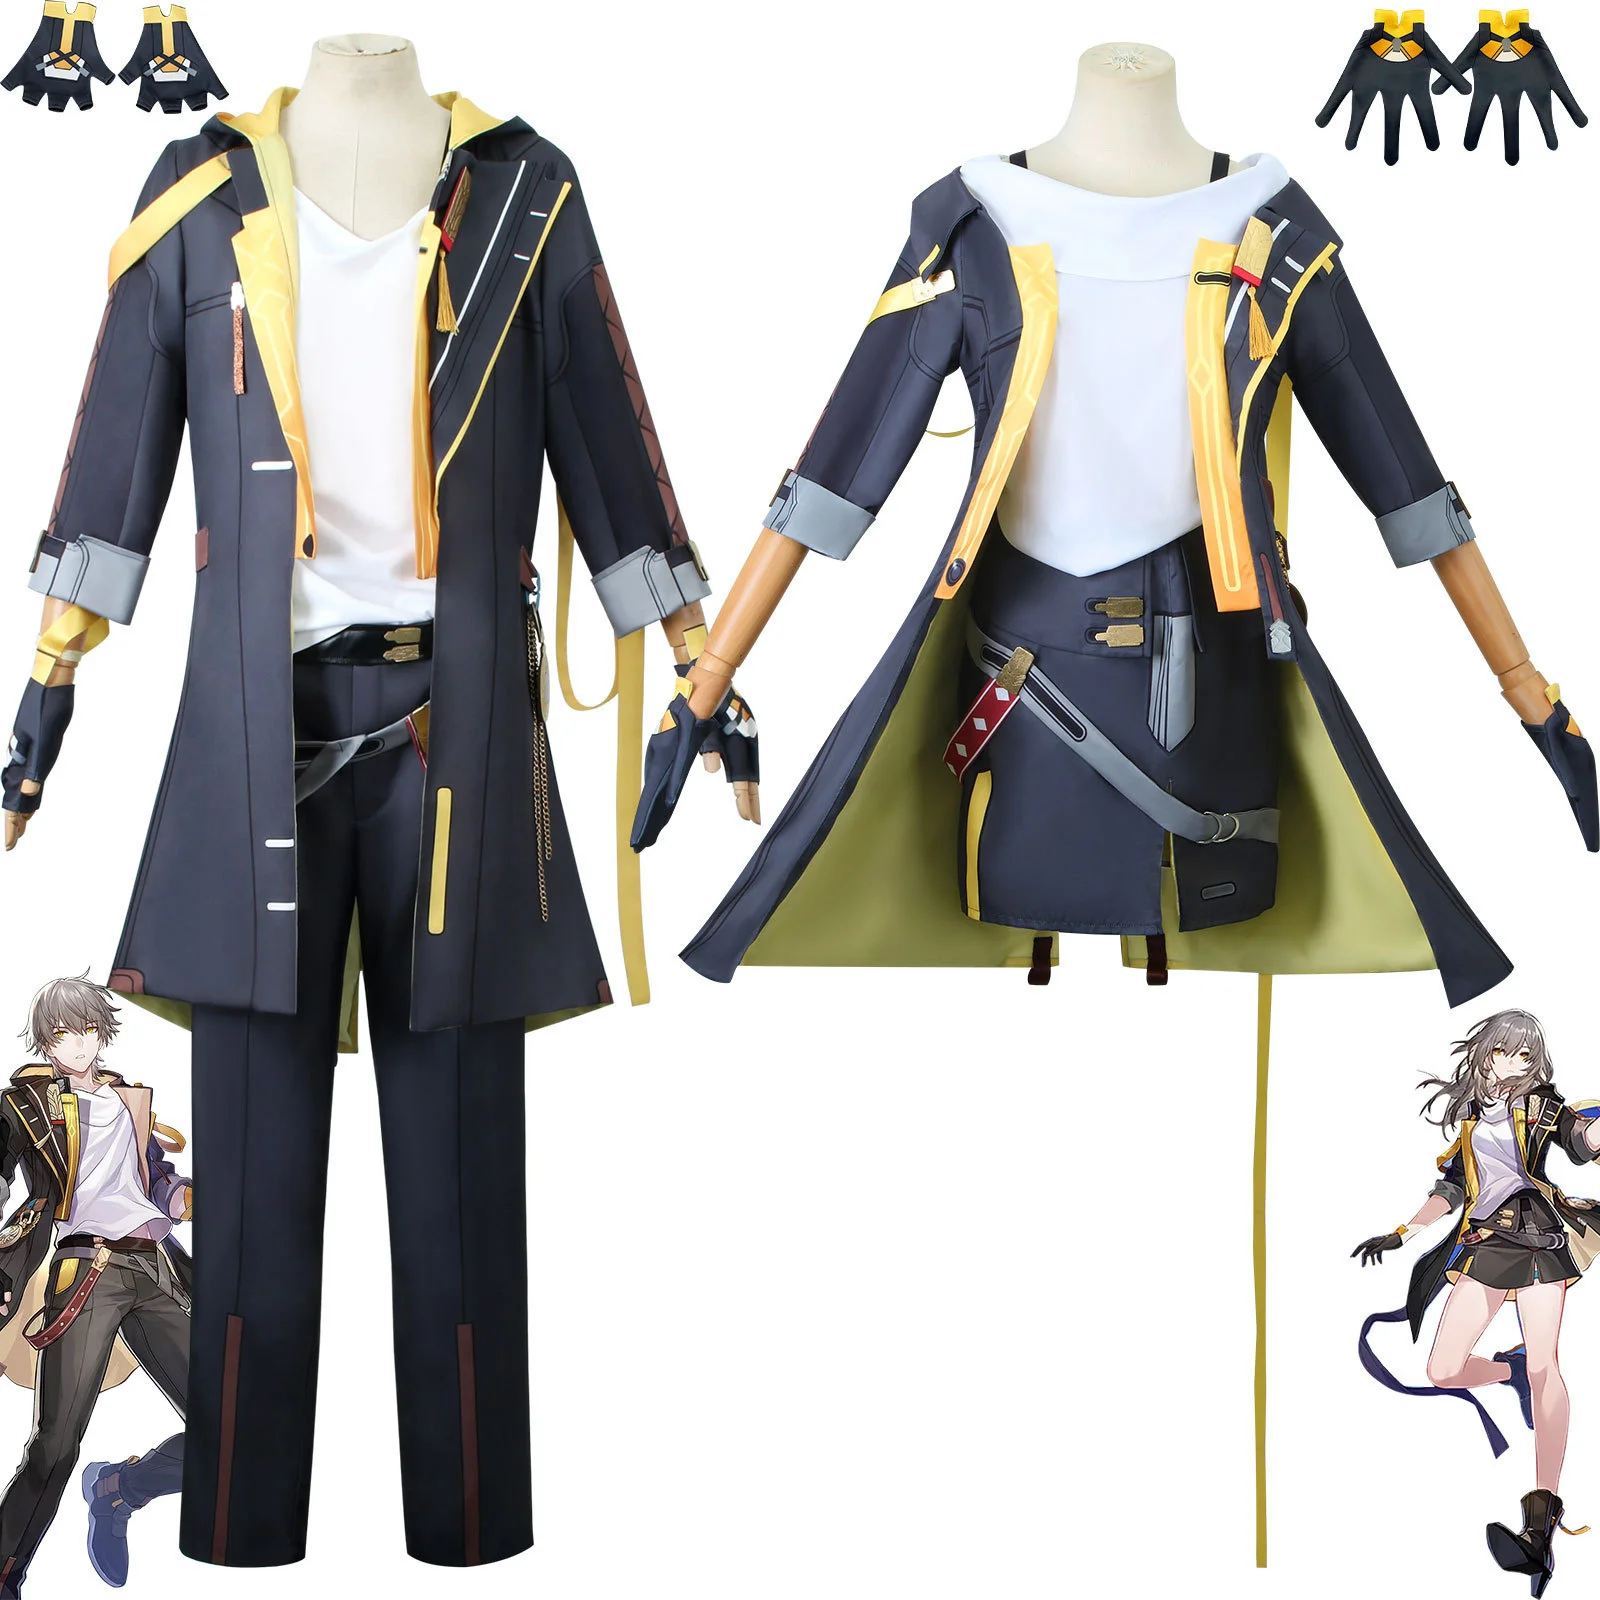 

Game Honkai: Star Rail Trailblazer Female Protagonist Cosplay Costumes Anime Suit Women Fancy Dress Outfit Wig Halloween Party